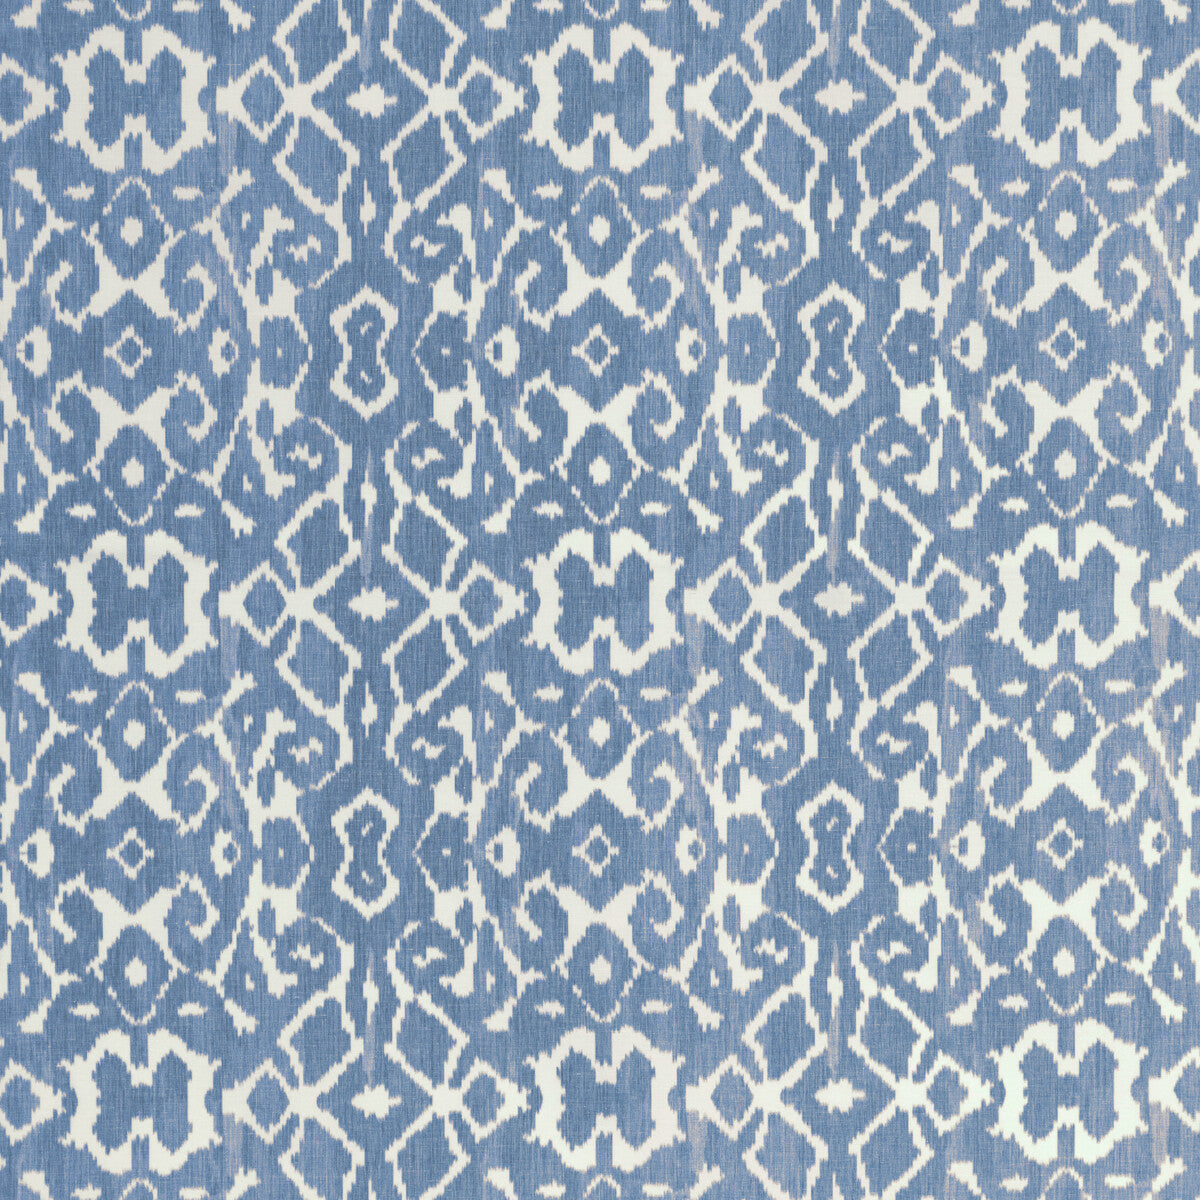 Toponas Print fabric in denim color - pattern 2020206.505.0 - by Lee Jofa in the Breckenridge collection